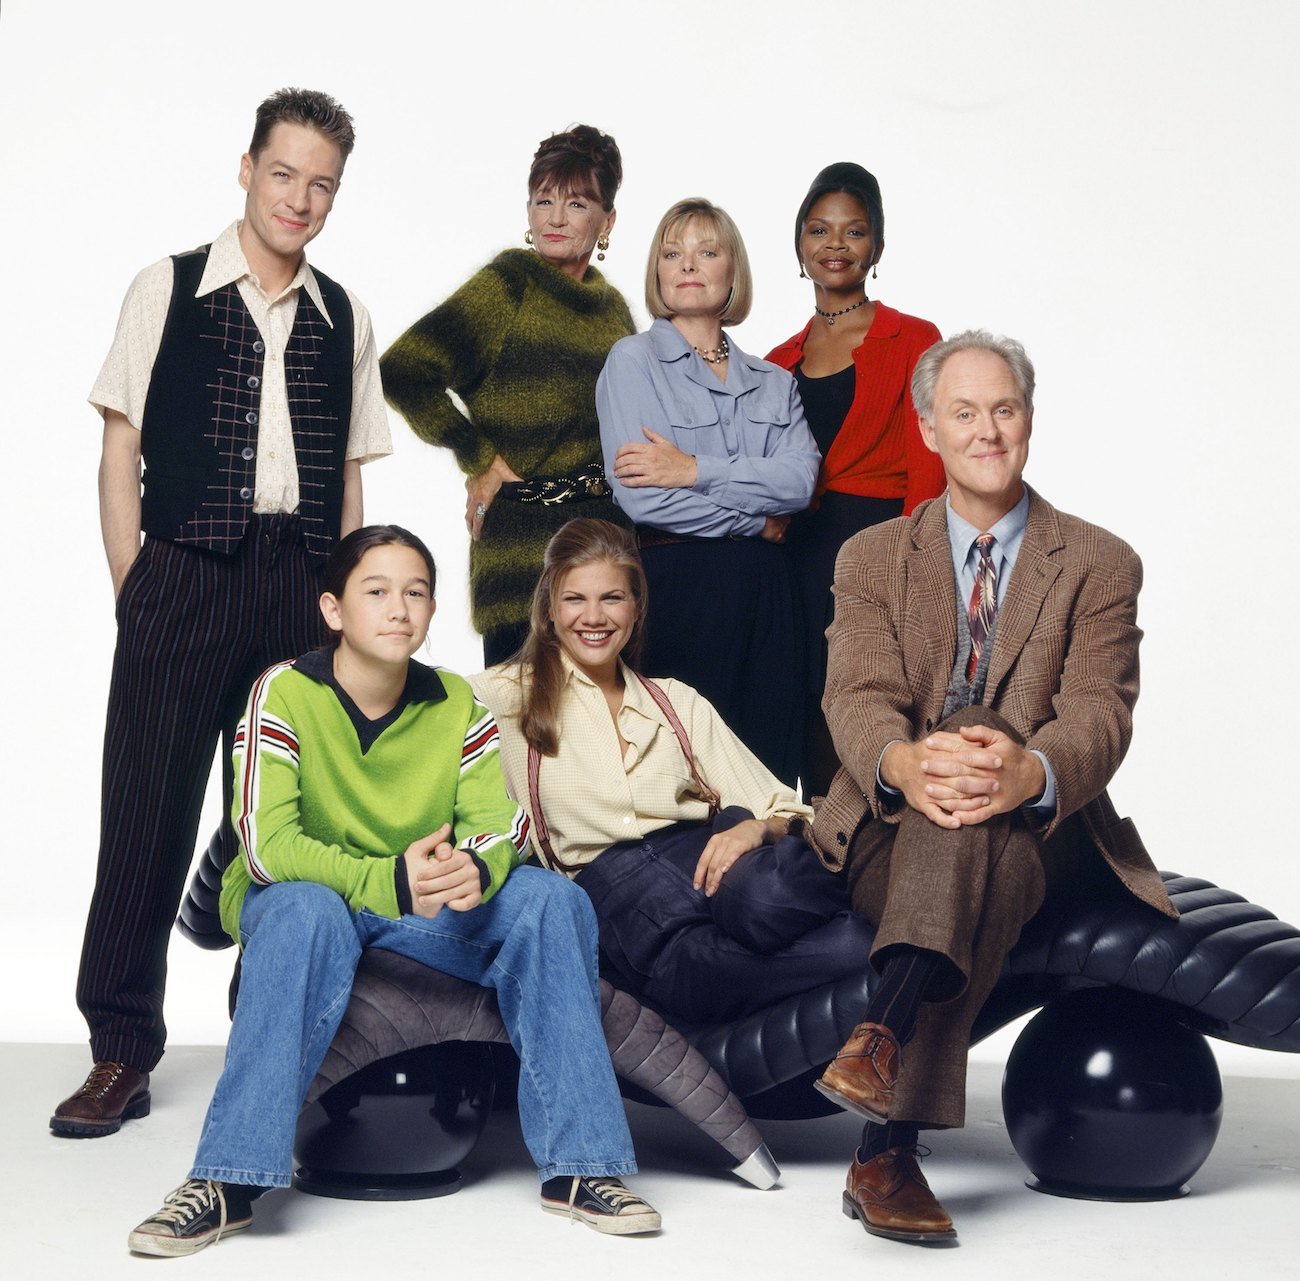 '3rd Rock from the Sun' Cast